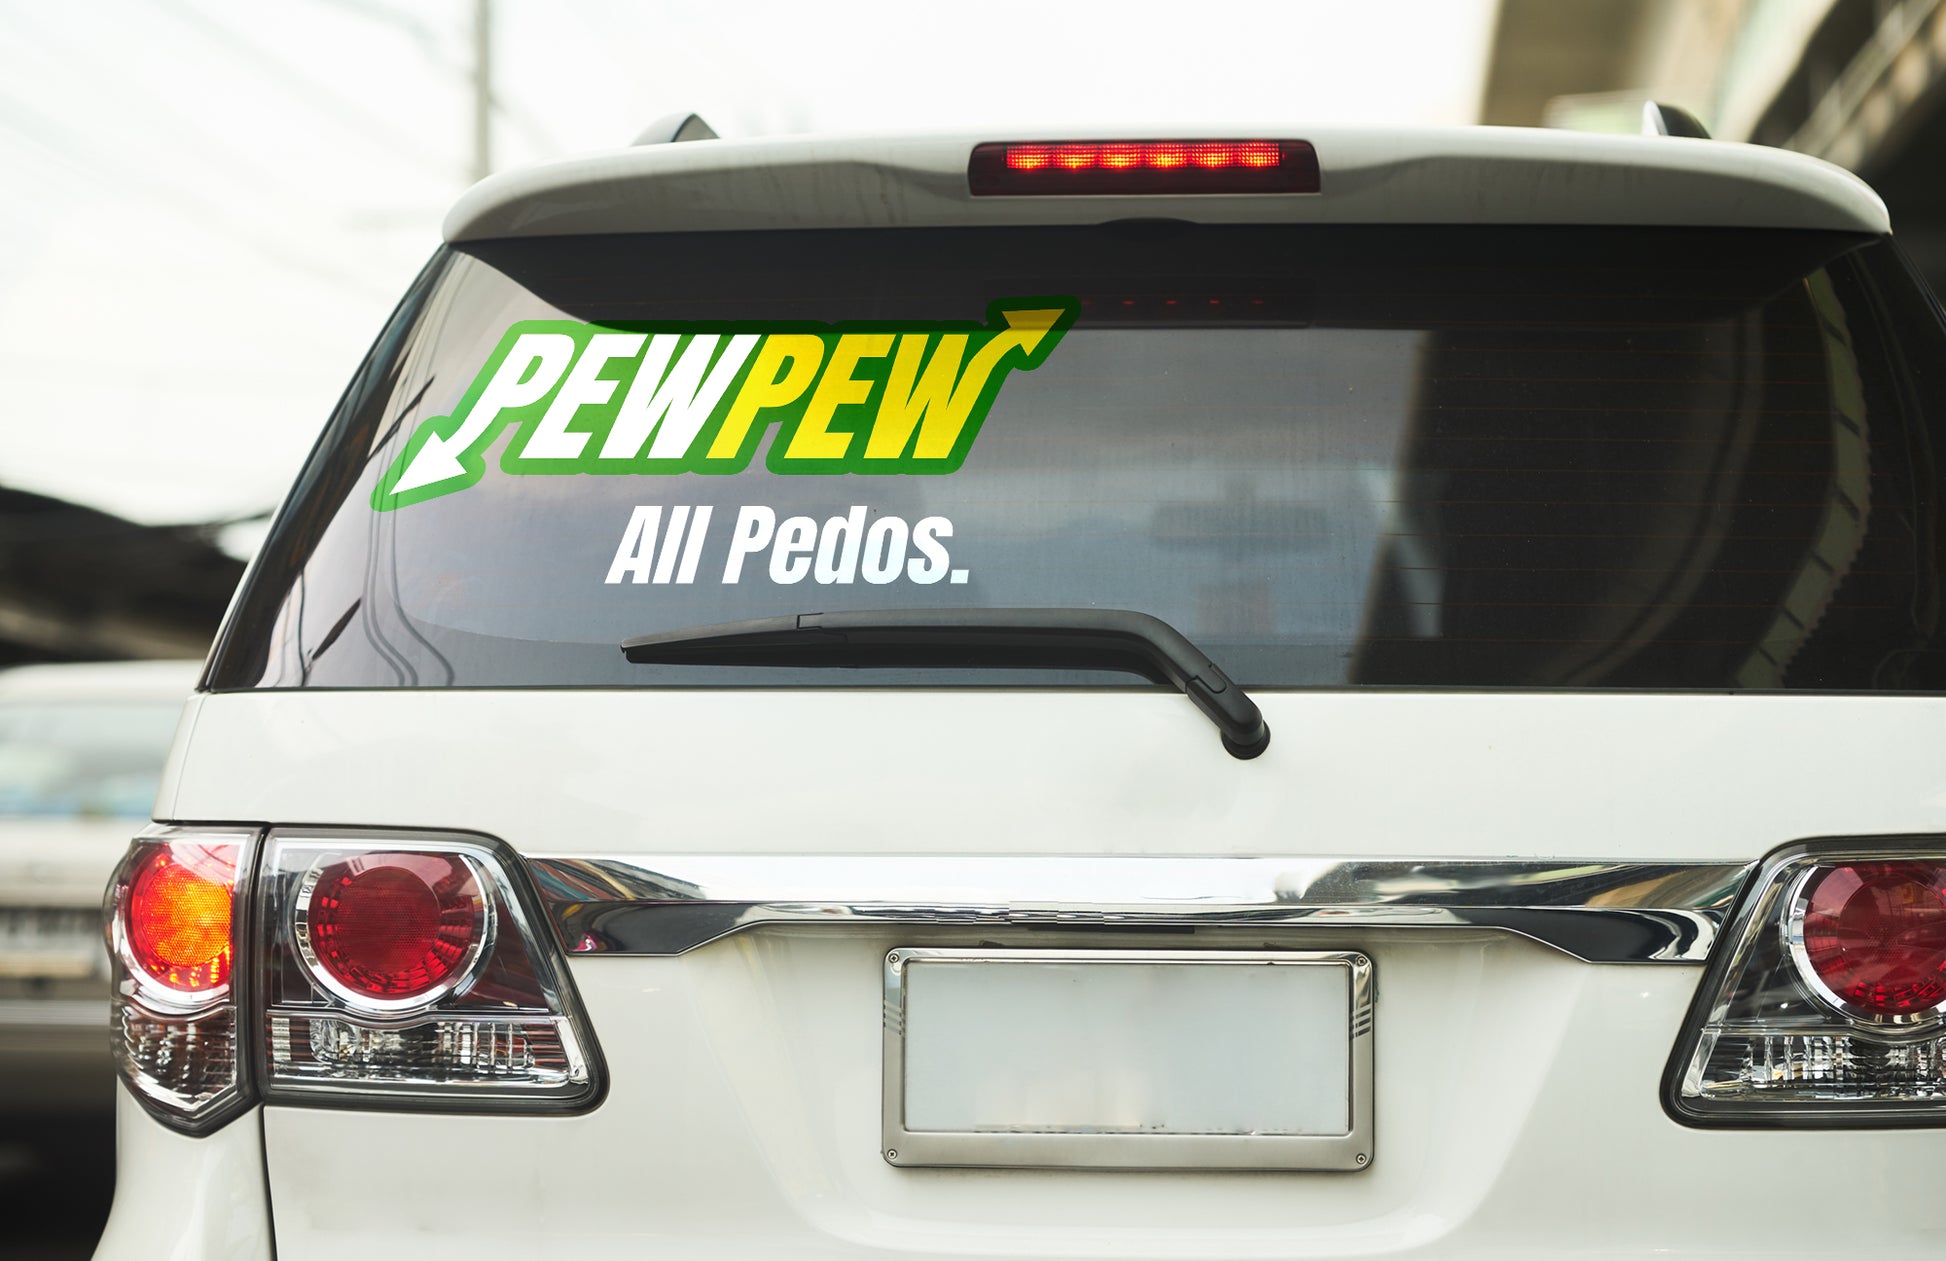 PewPew ALL Pedos Vinyl decal decal stickers Decals for cars Decals for Trucks decals for tumblers minivan sticker SUV decals truck decals window decal car Window decals window decor